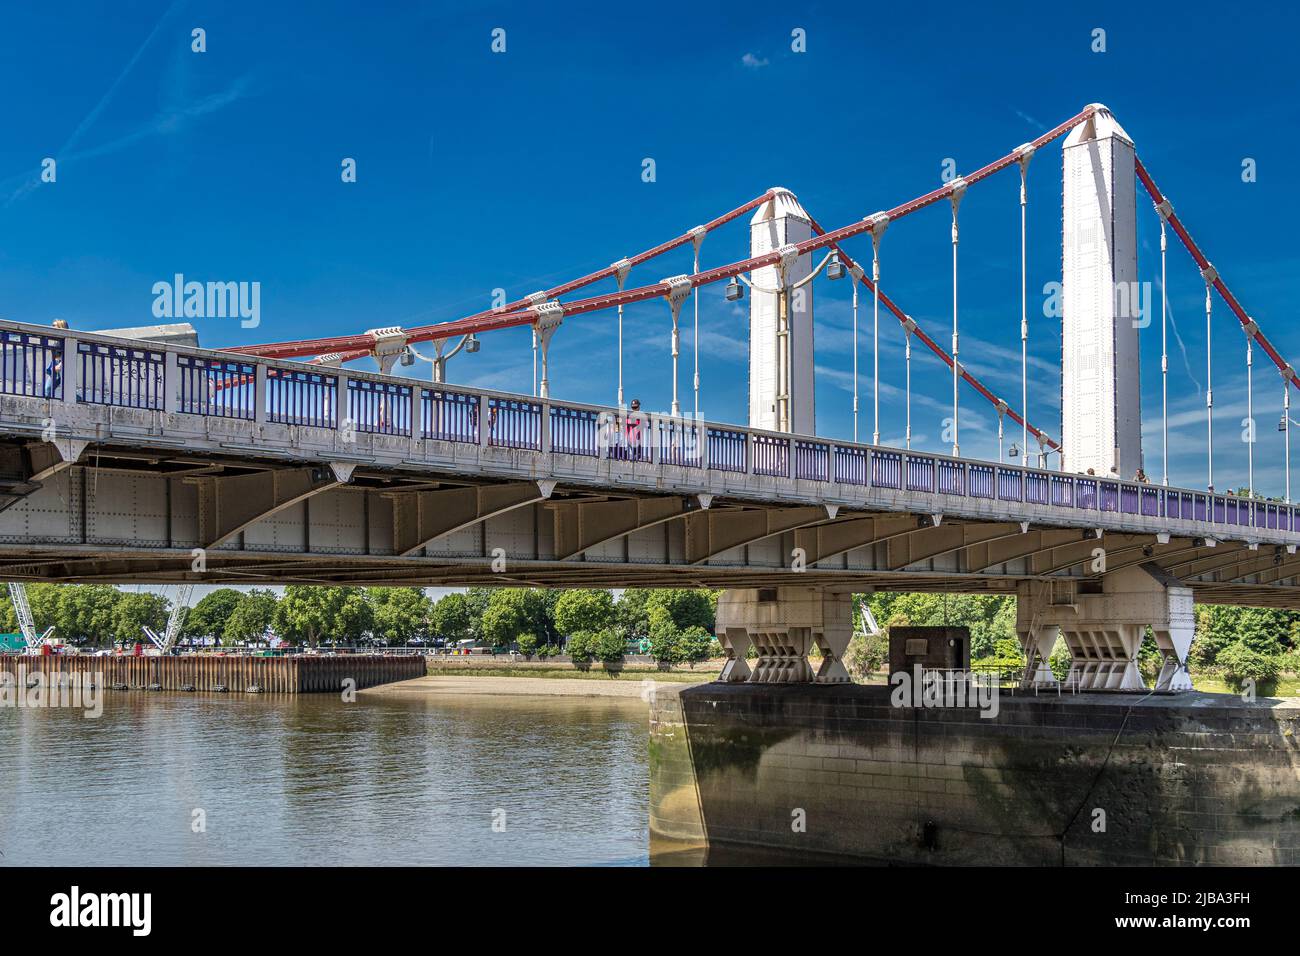 Chelsea Bridge on the River Thames in South West London, connects Chelsea on the north side of the River to Battersea on the South side, London, UK Stock Photo